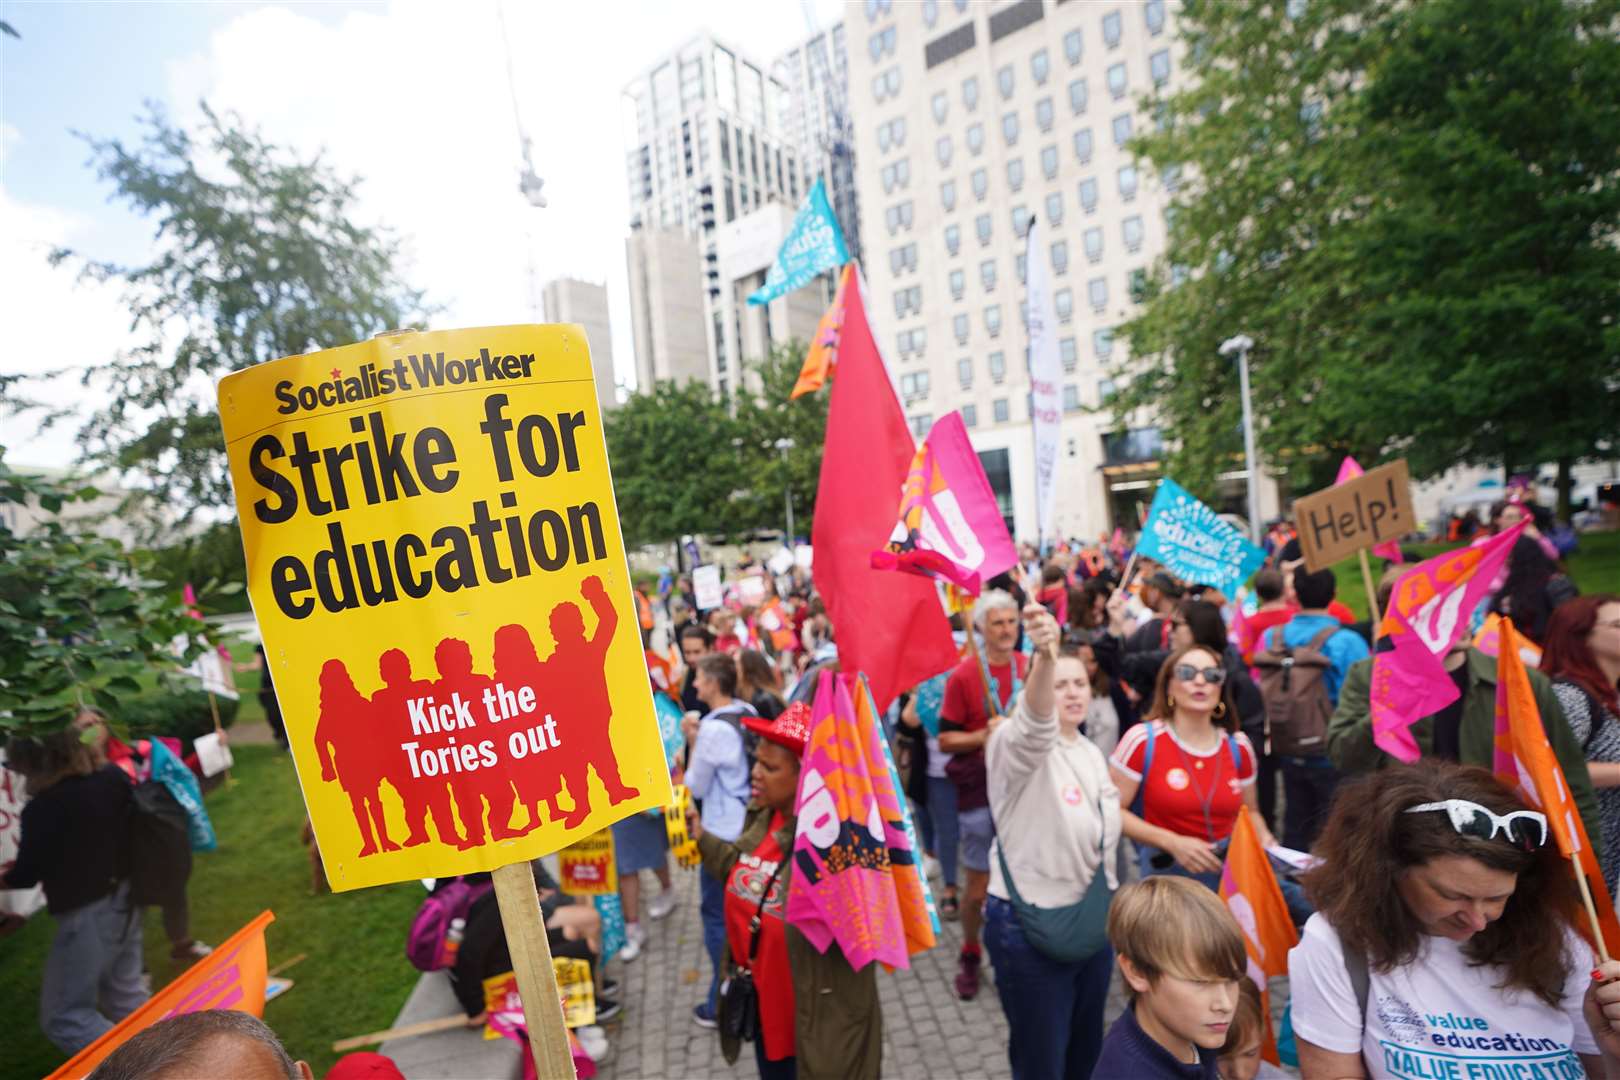 Members of the National Education Union take part in a rally through Westminster (James Manning/PA)